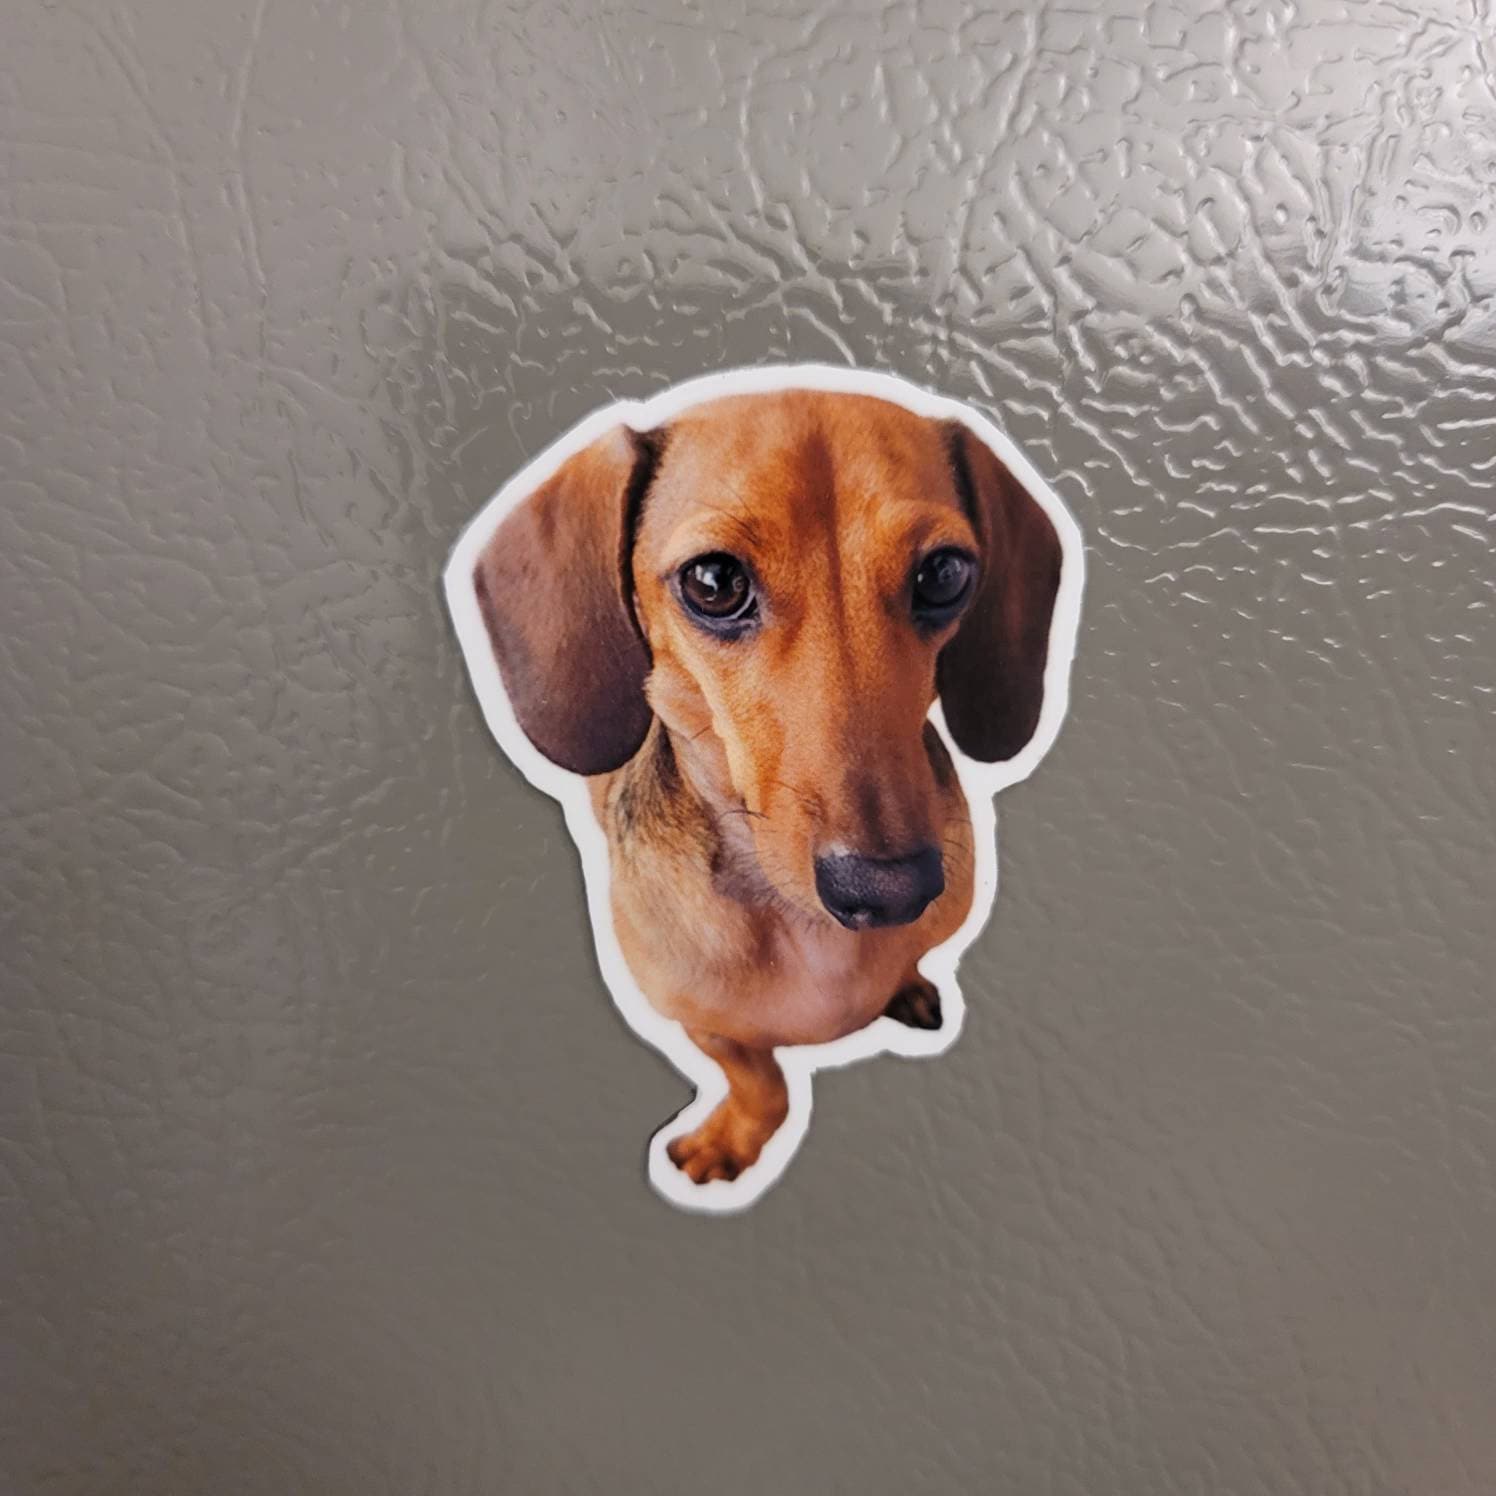 HOUND DOG SOFT NOVELTY  with MAGNETS WITH IN PAWS AND TUMMY! FRIDGE MAGNET 